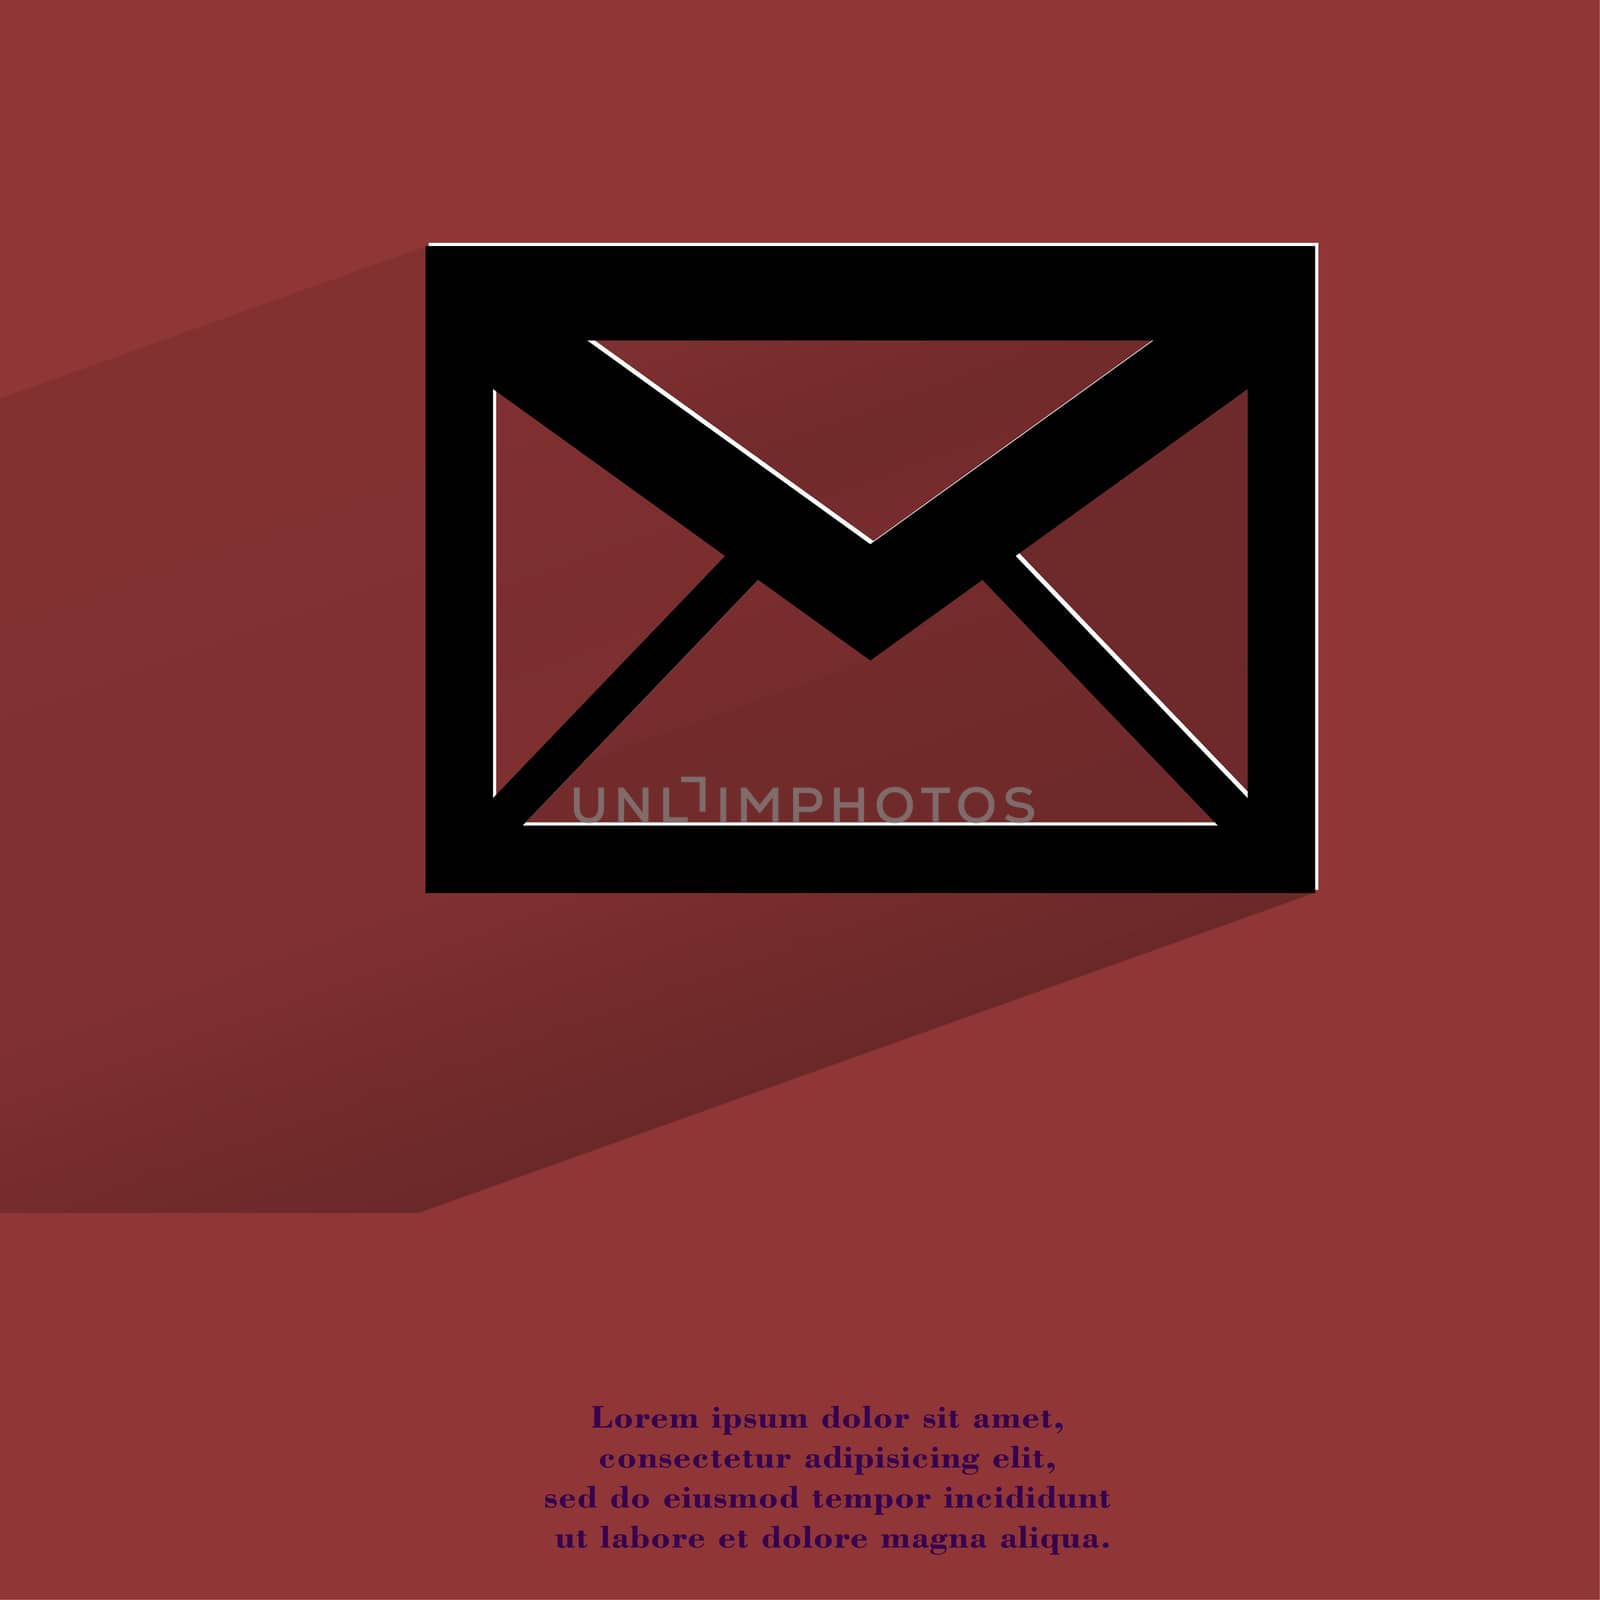 mail. envelope Flat modern web button with long shadow and space for your text. . 